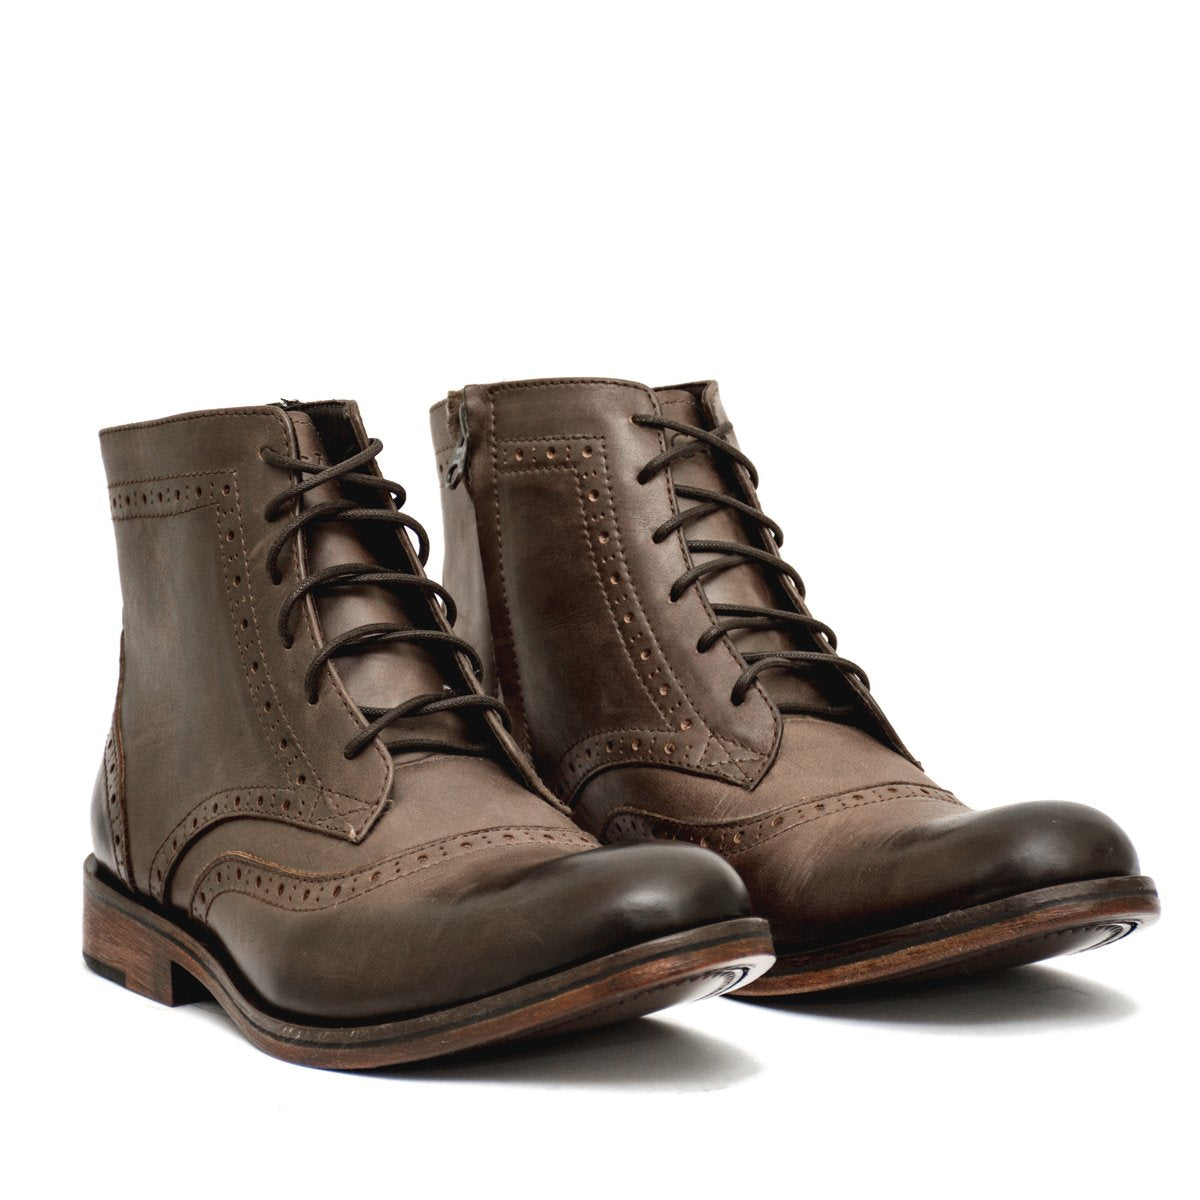 Urbano Frank - leather boots